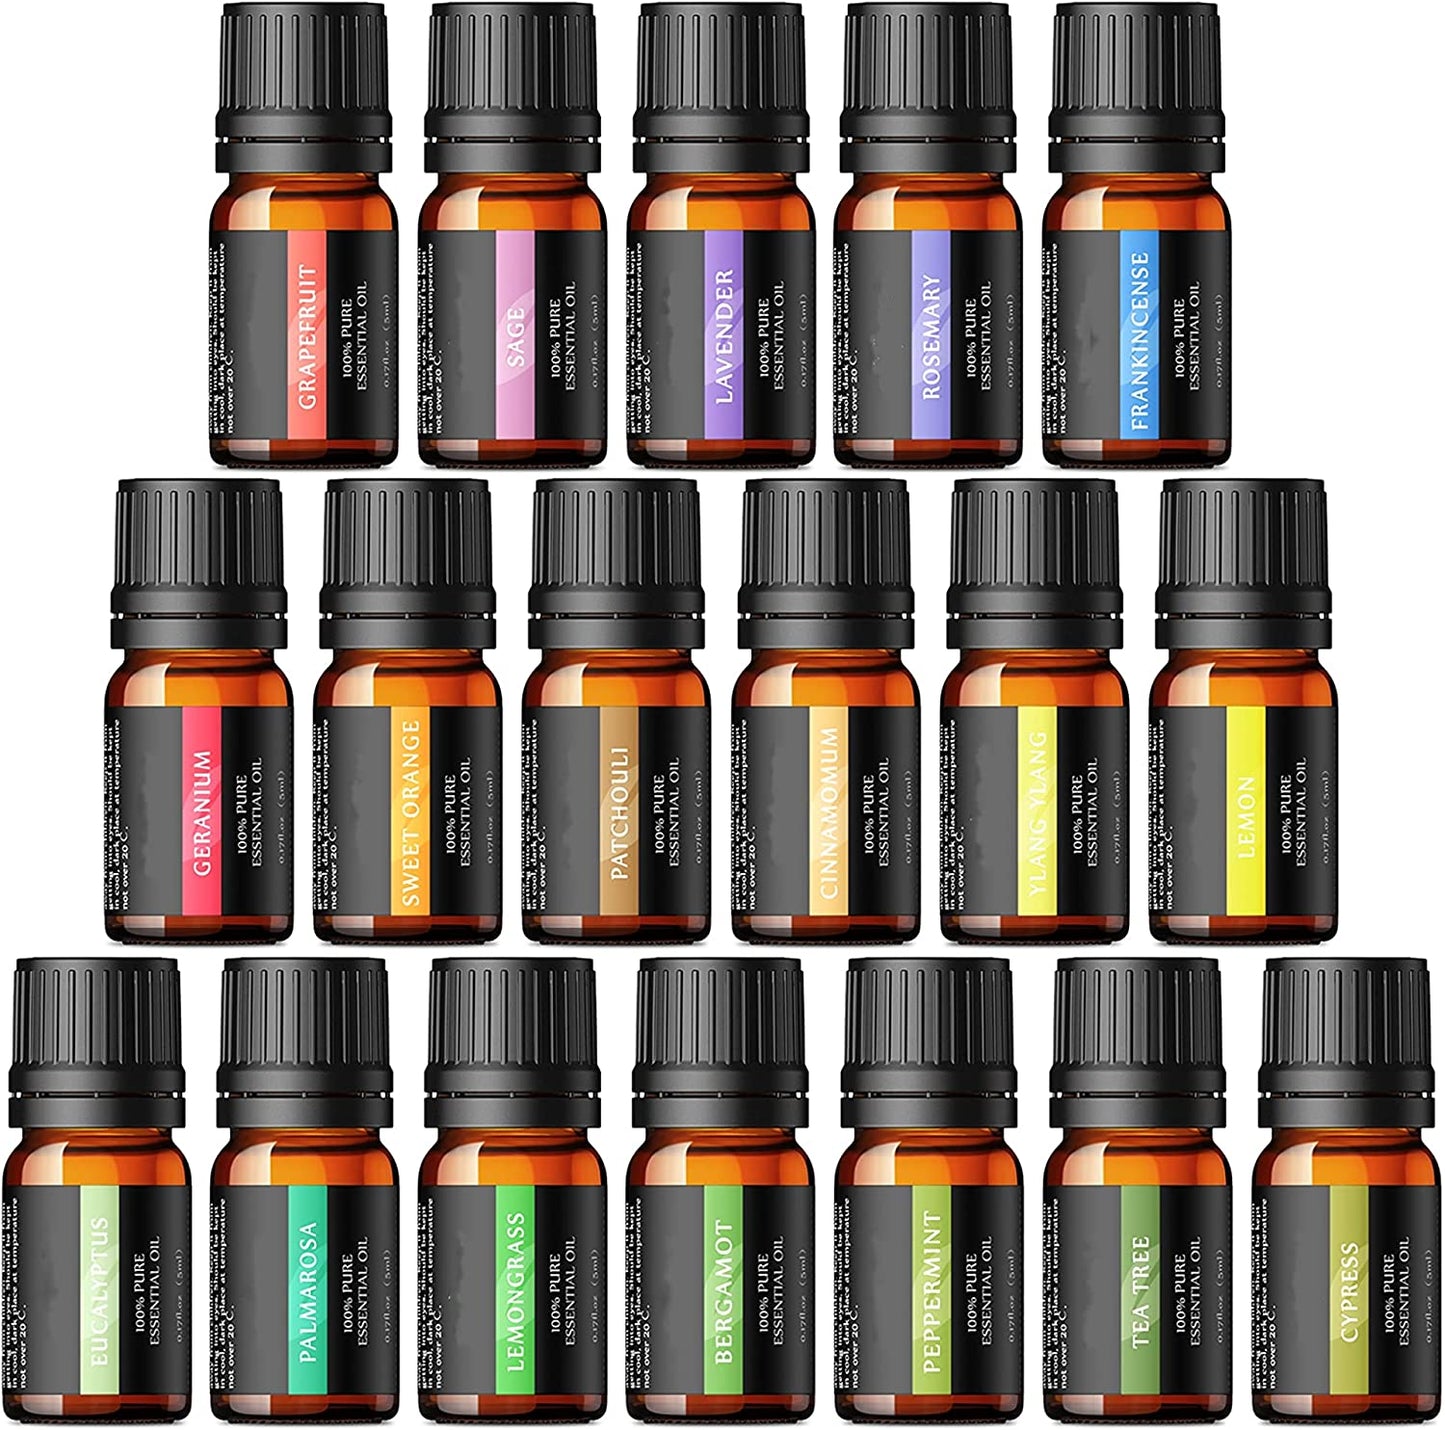 18 Pure Essential Oils, Aromatherapy, 18*5ml for Humidifier, Diffuser, Massage, Candle Making, Skin